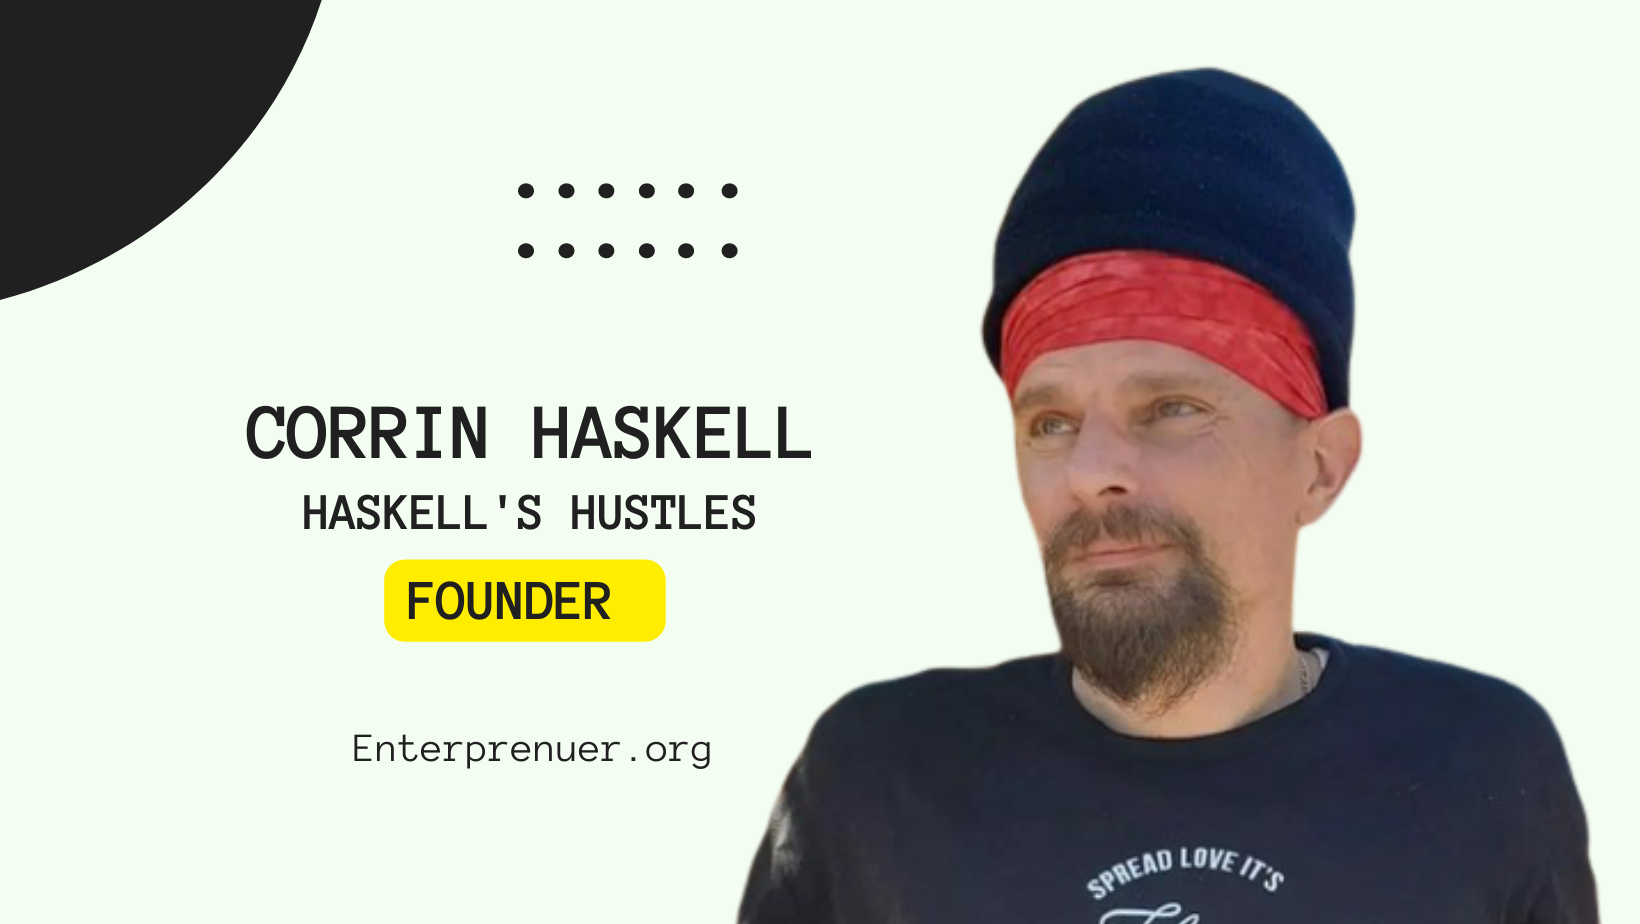 Corrin Haskell Founder of Haskell's Hustles